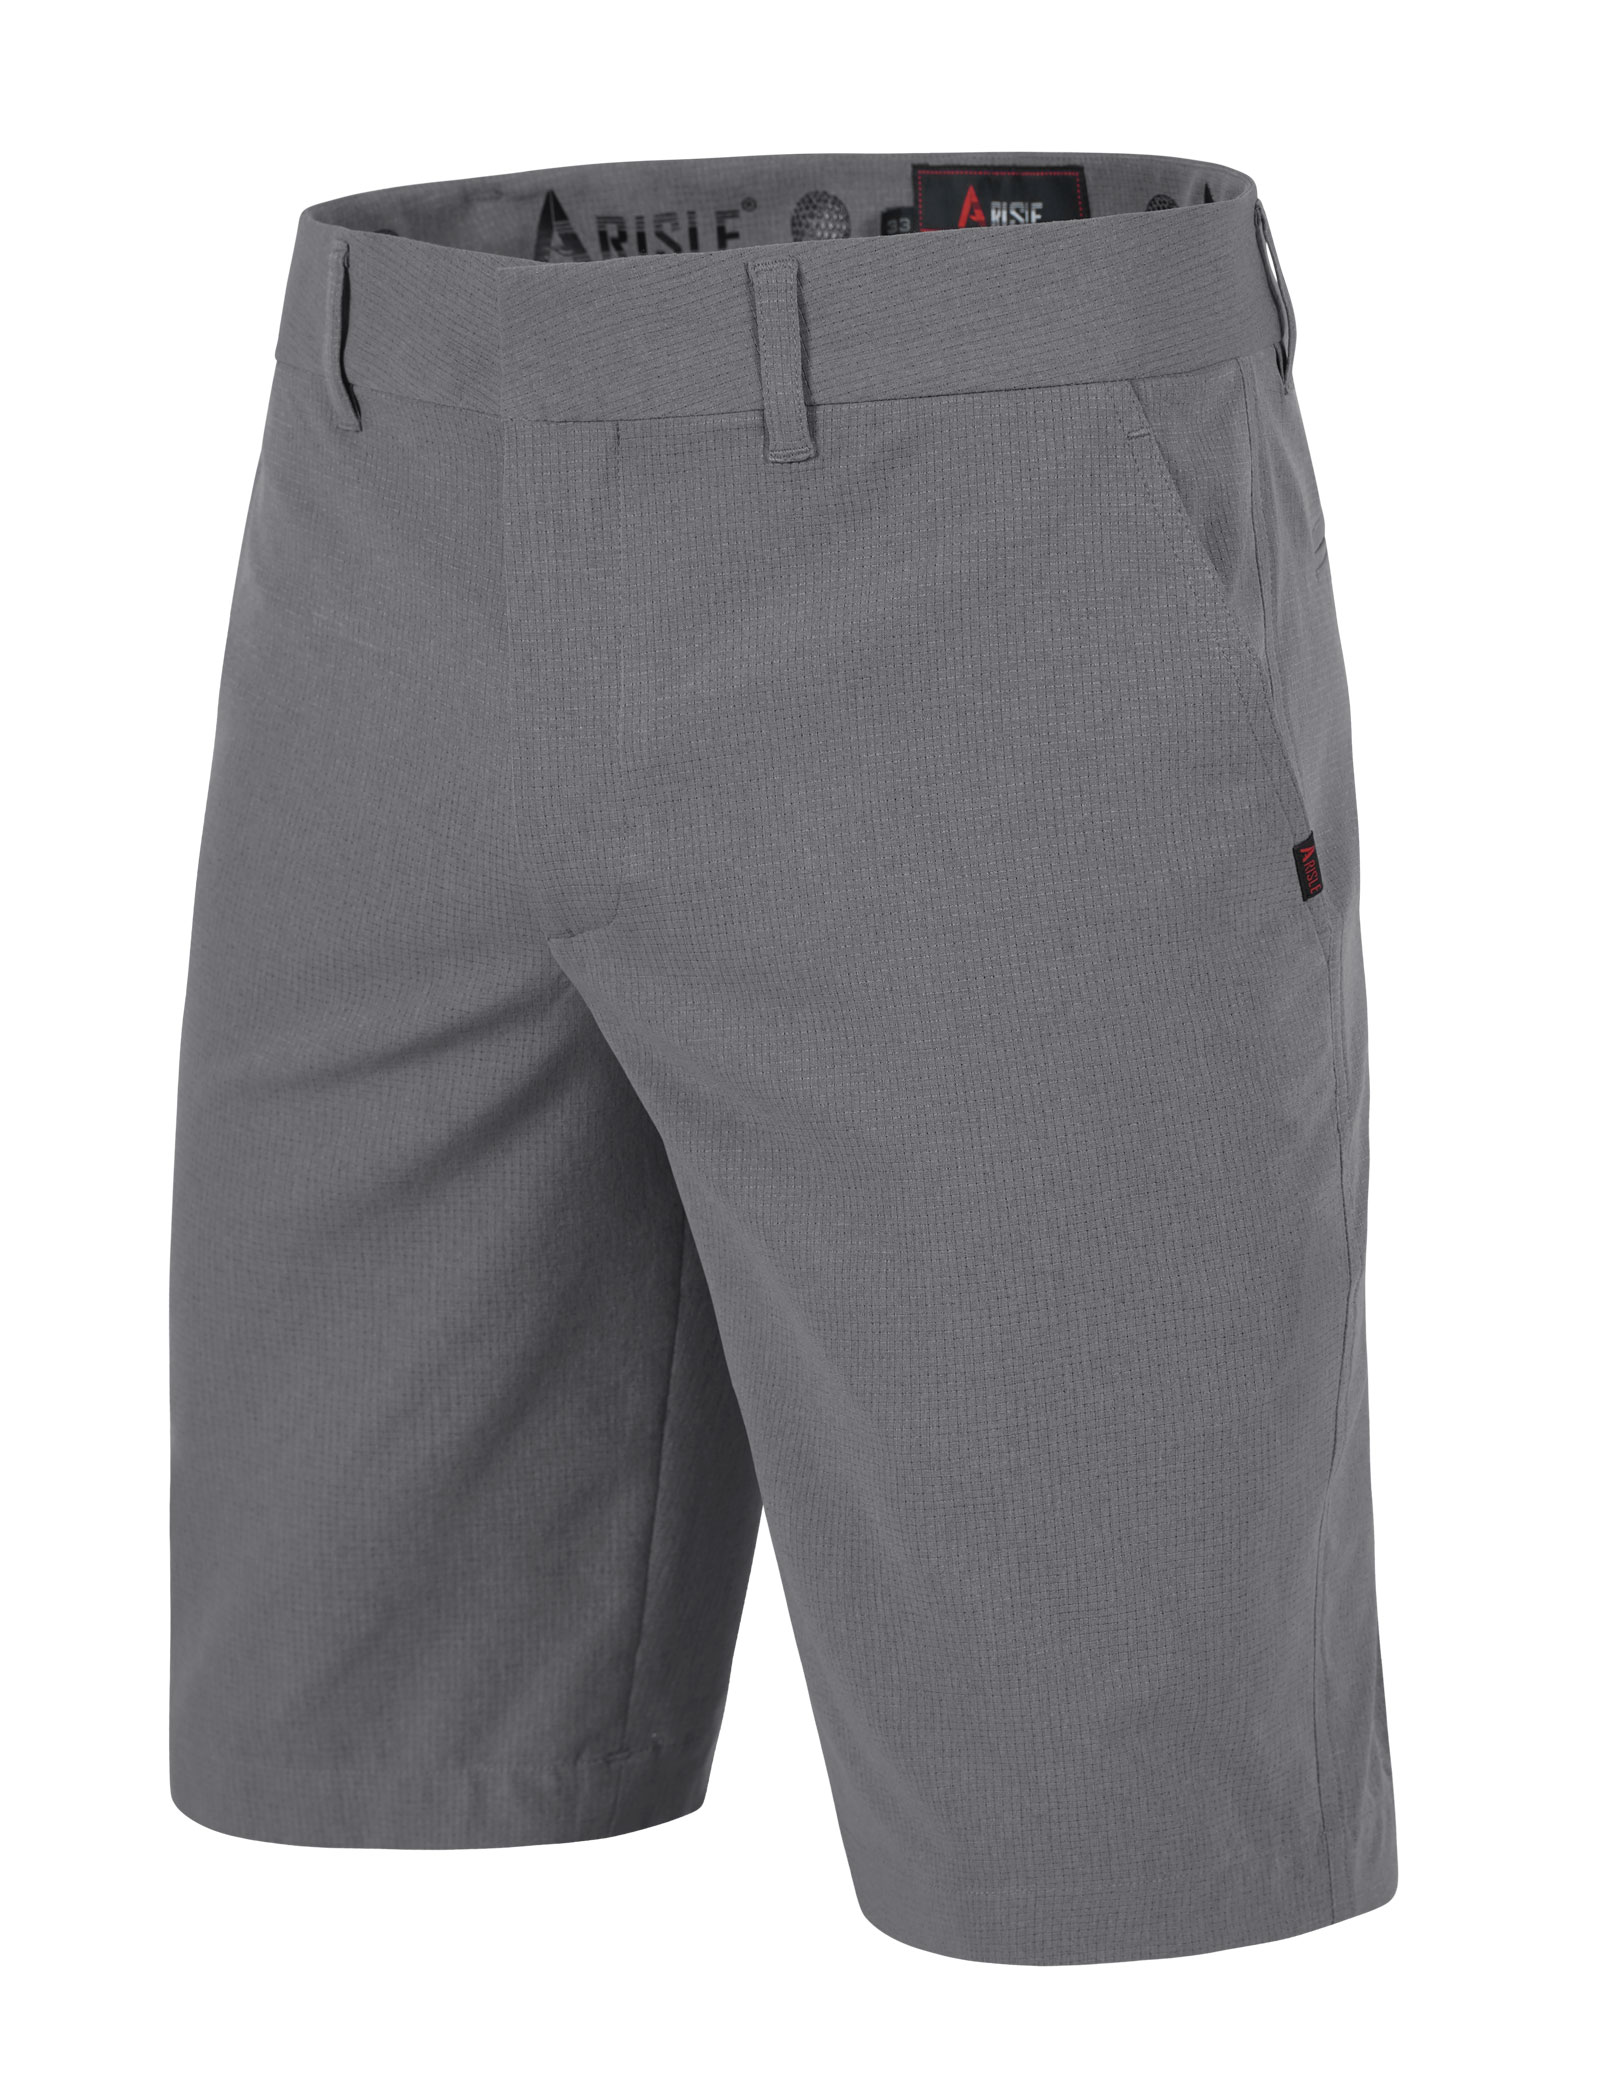 QuYn-Golf-Shorts-Arisle-Square-Knot-Coolvent-Grey